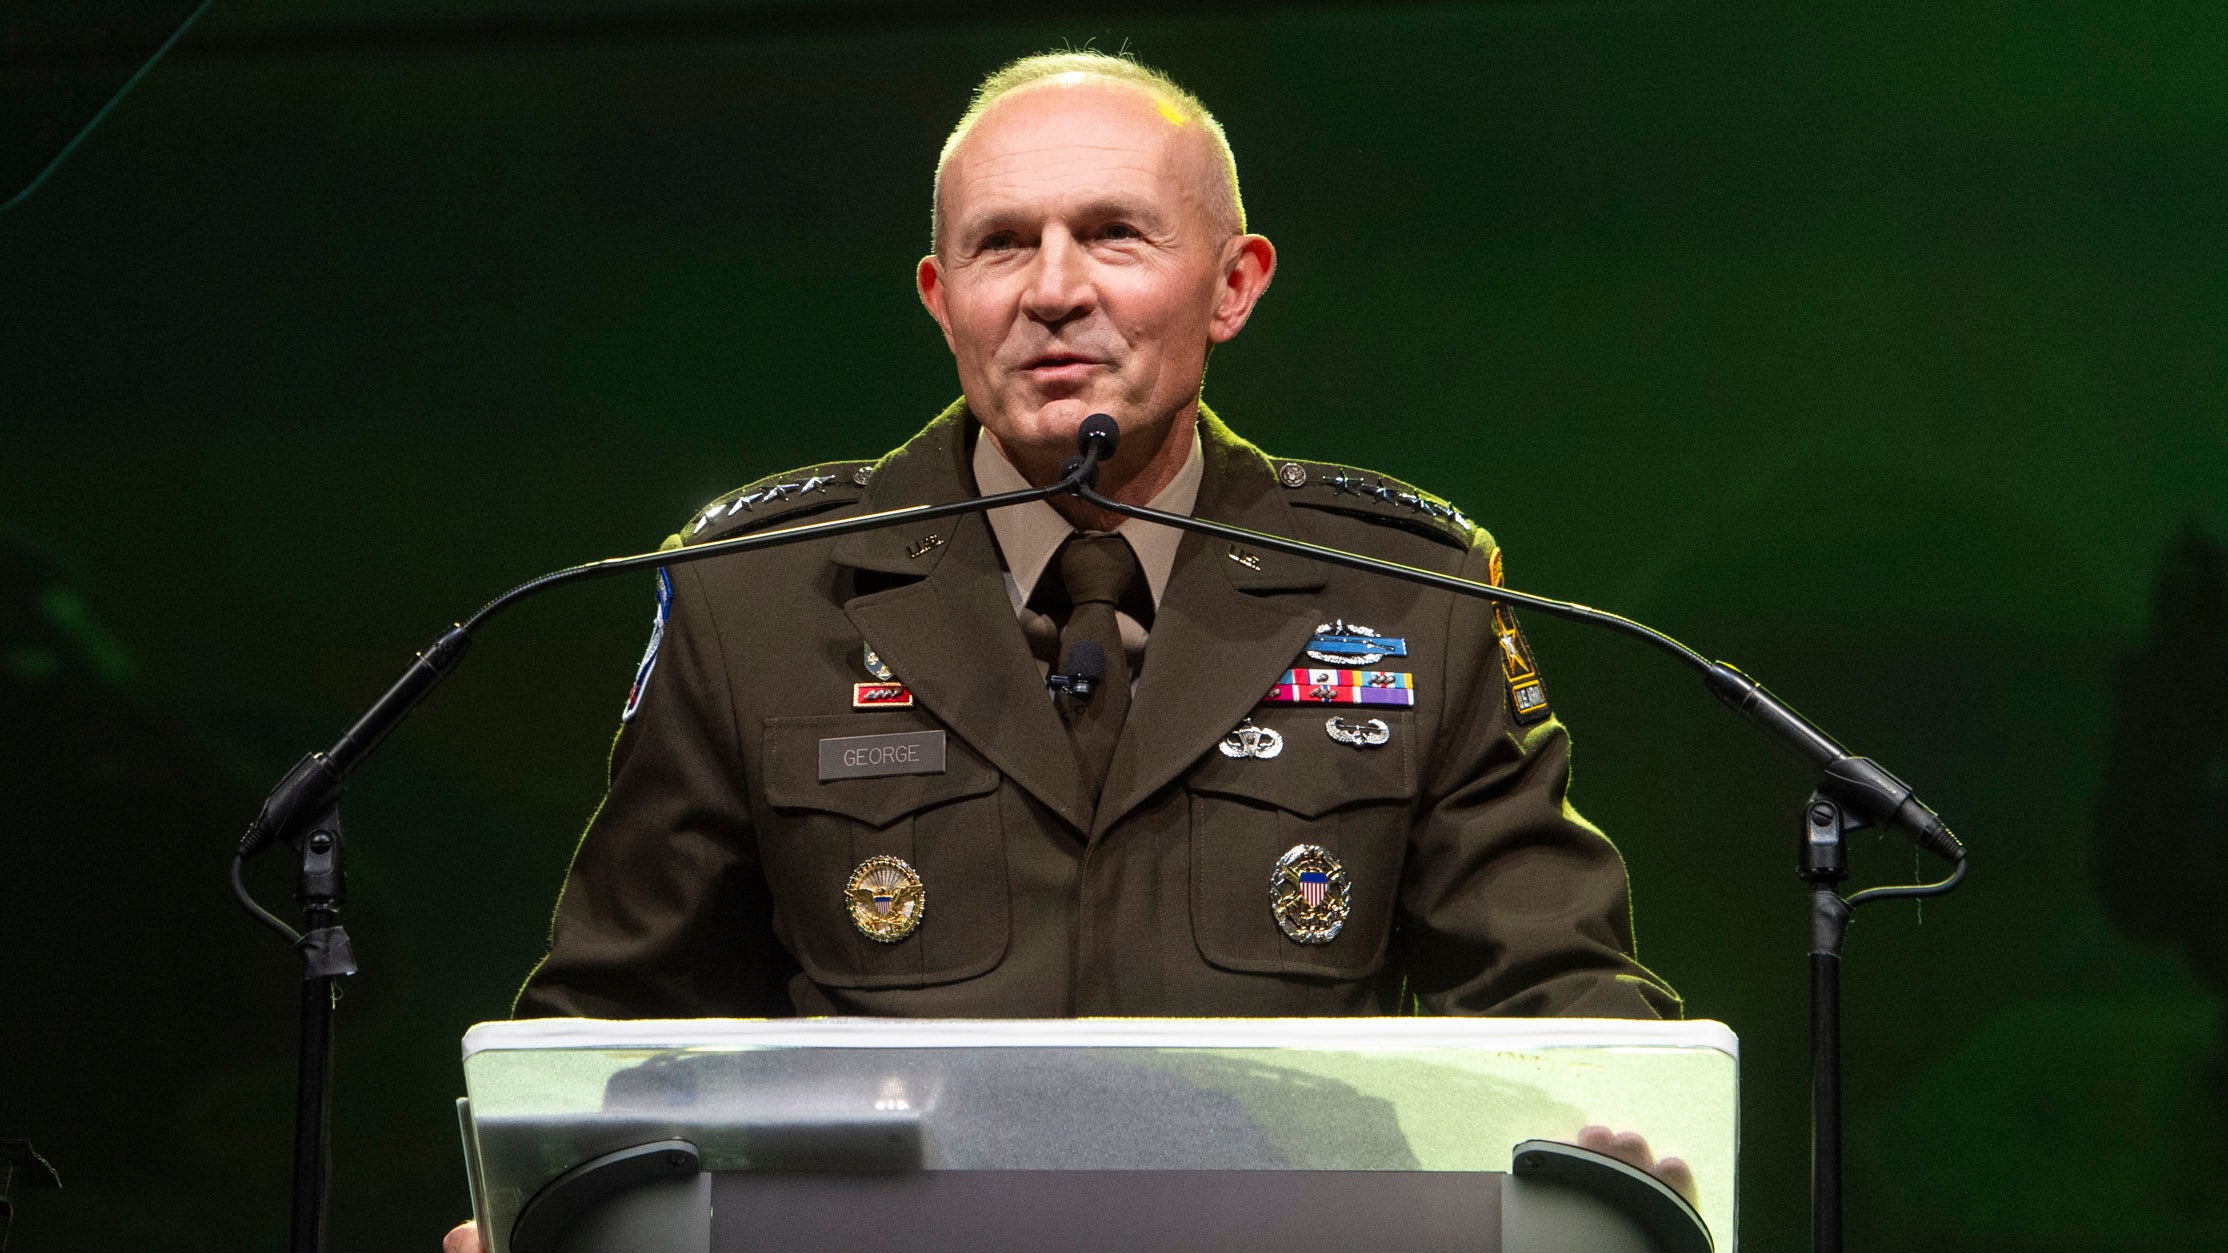 Chief of Staff of the Army Gen. Randy A. George speaks at the Dwight D. Eisenhower Luncheon at the AUSA 2023 Annual Meeting in Washington, D.C., Tuesday, Oct. 10, 2023. (Rod Lamkey for AUSA)